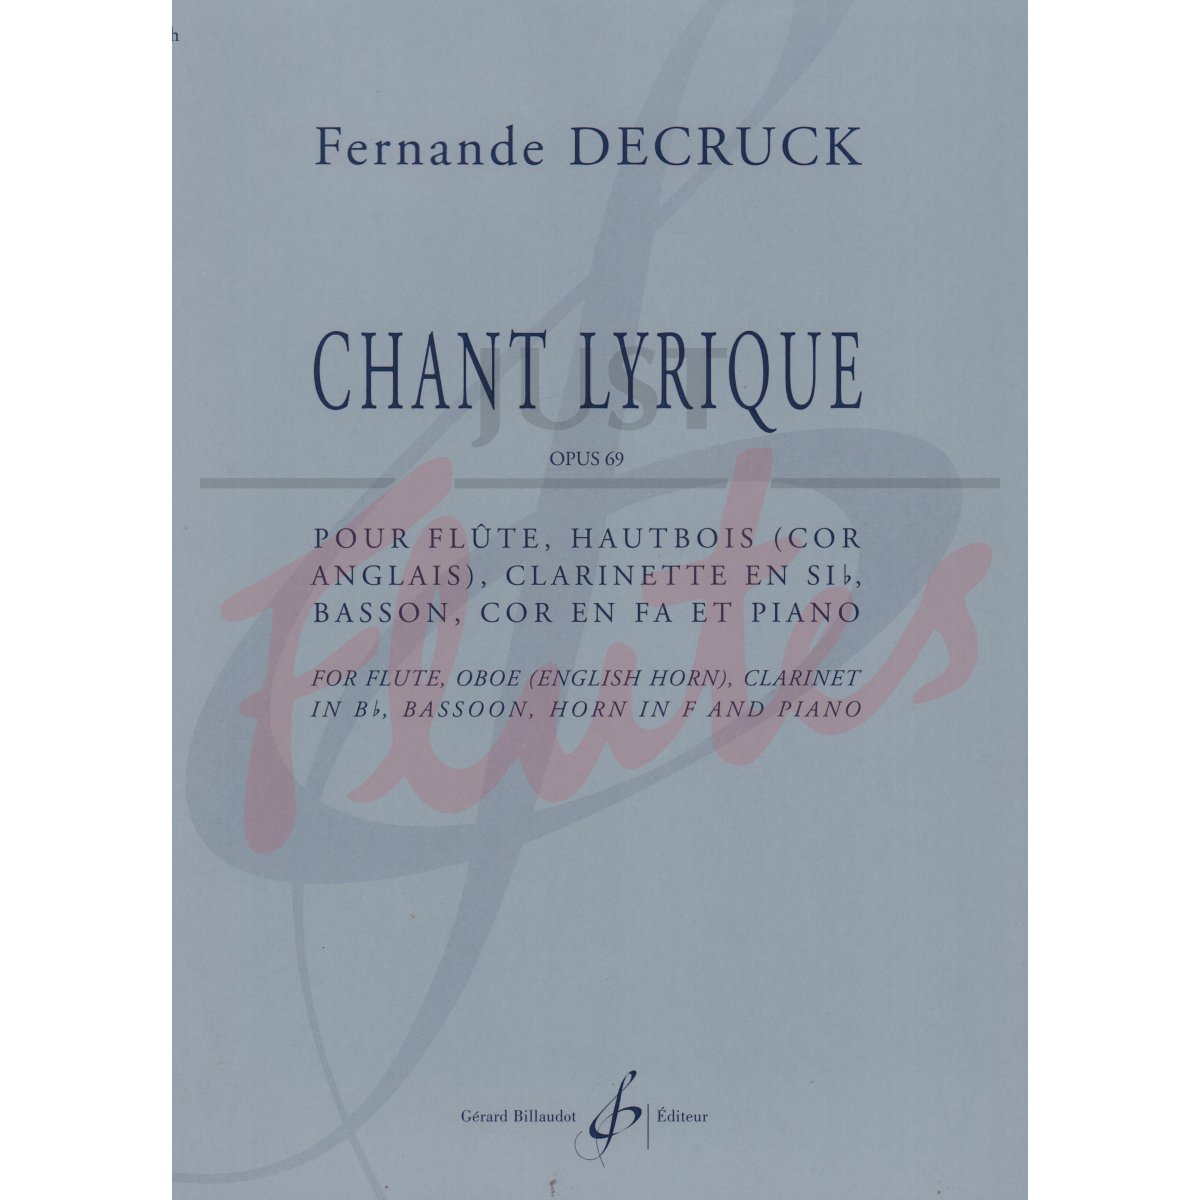 Chant Lyrique arranged for Wind Quintet and Piano